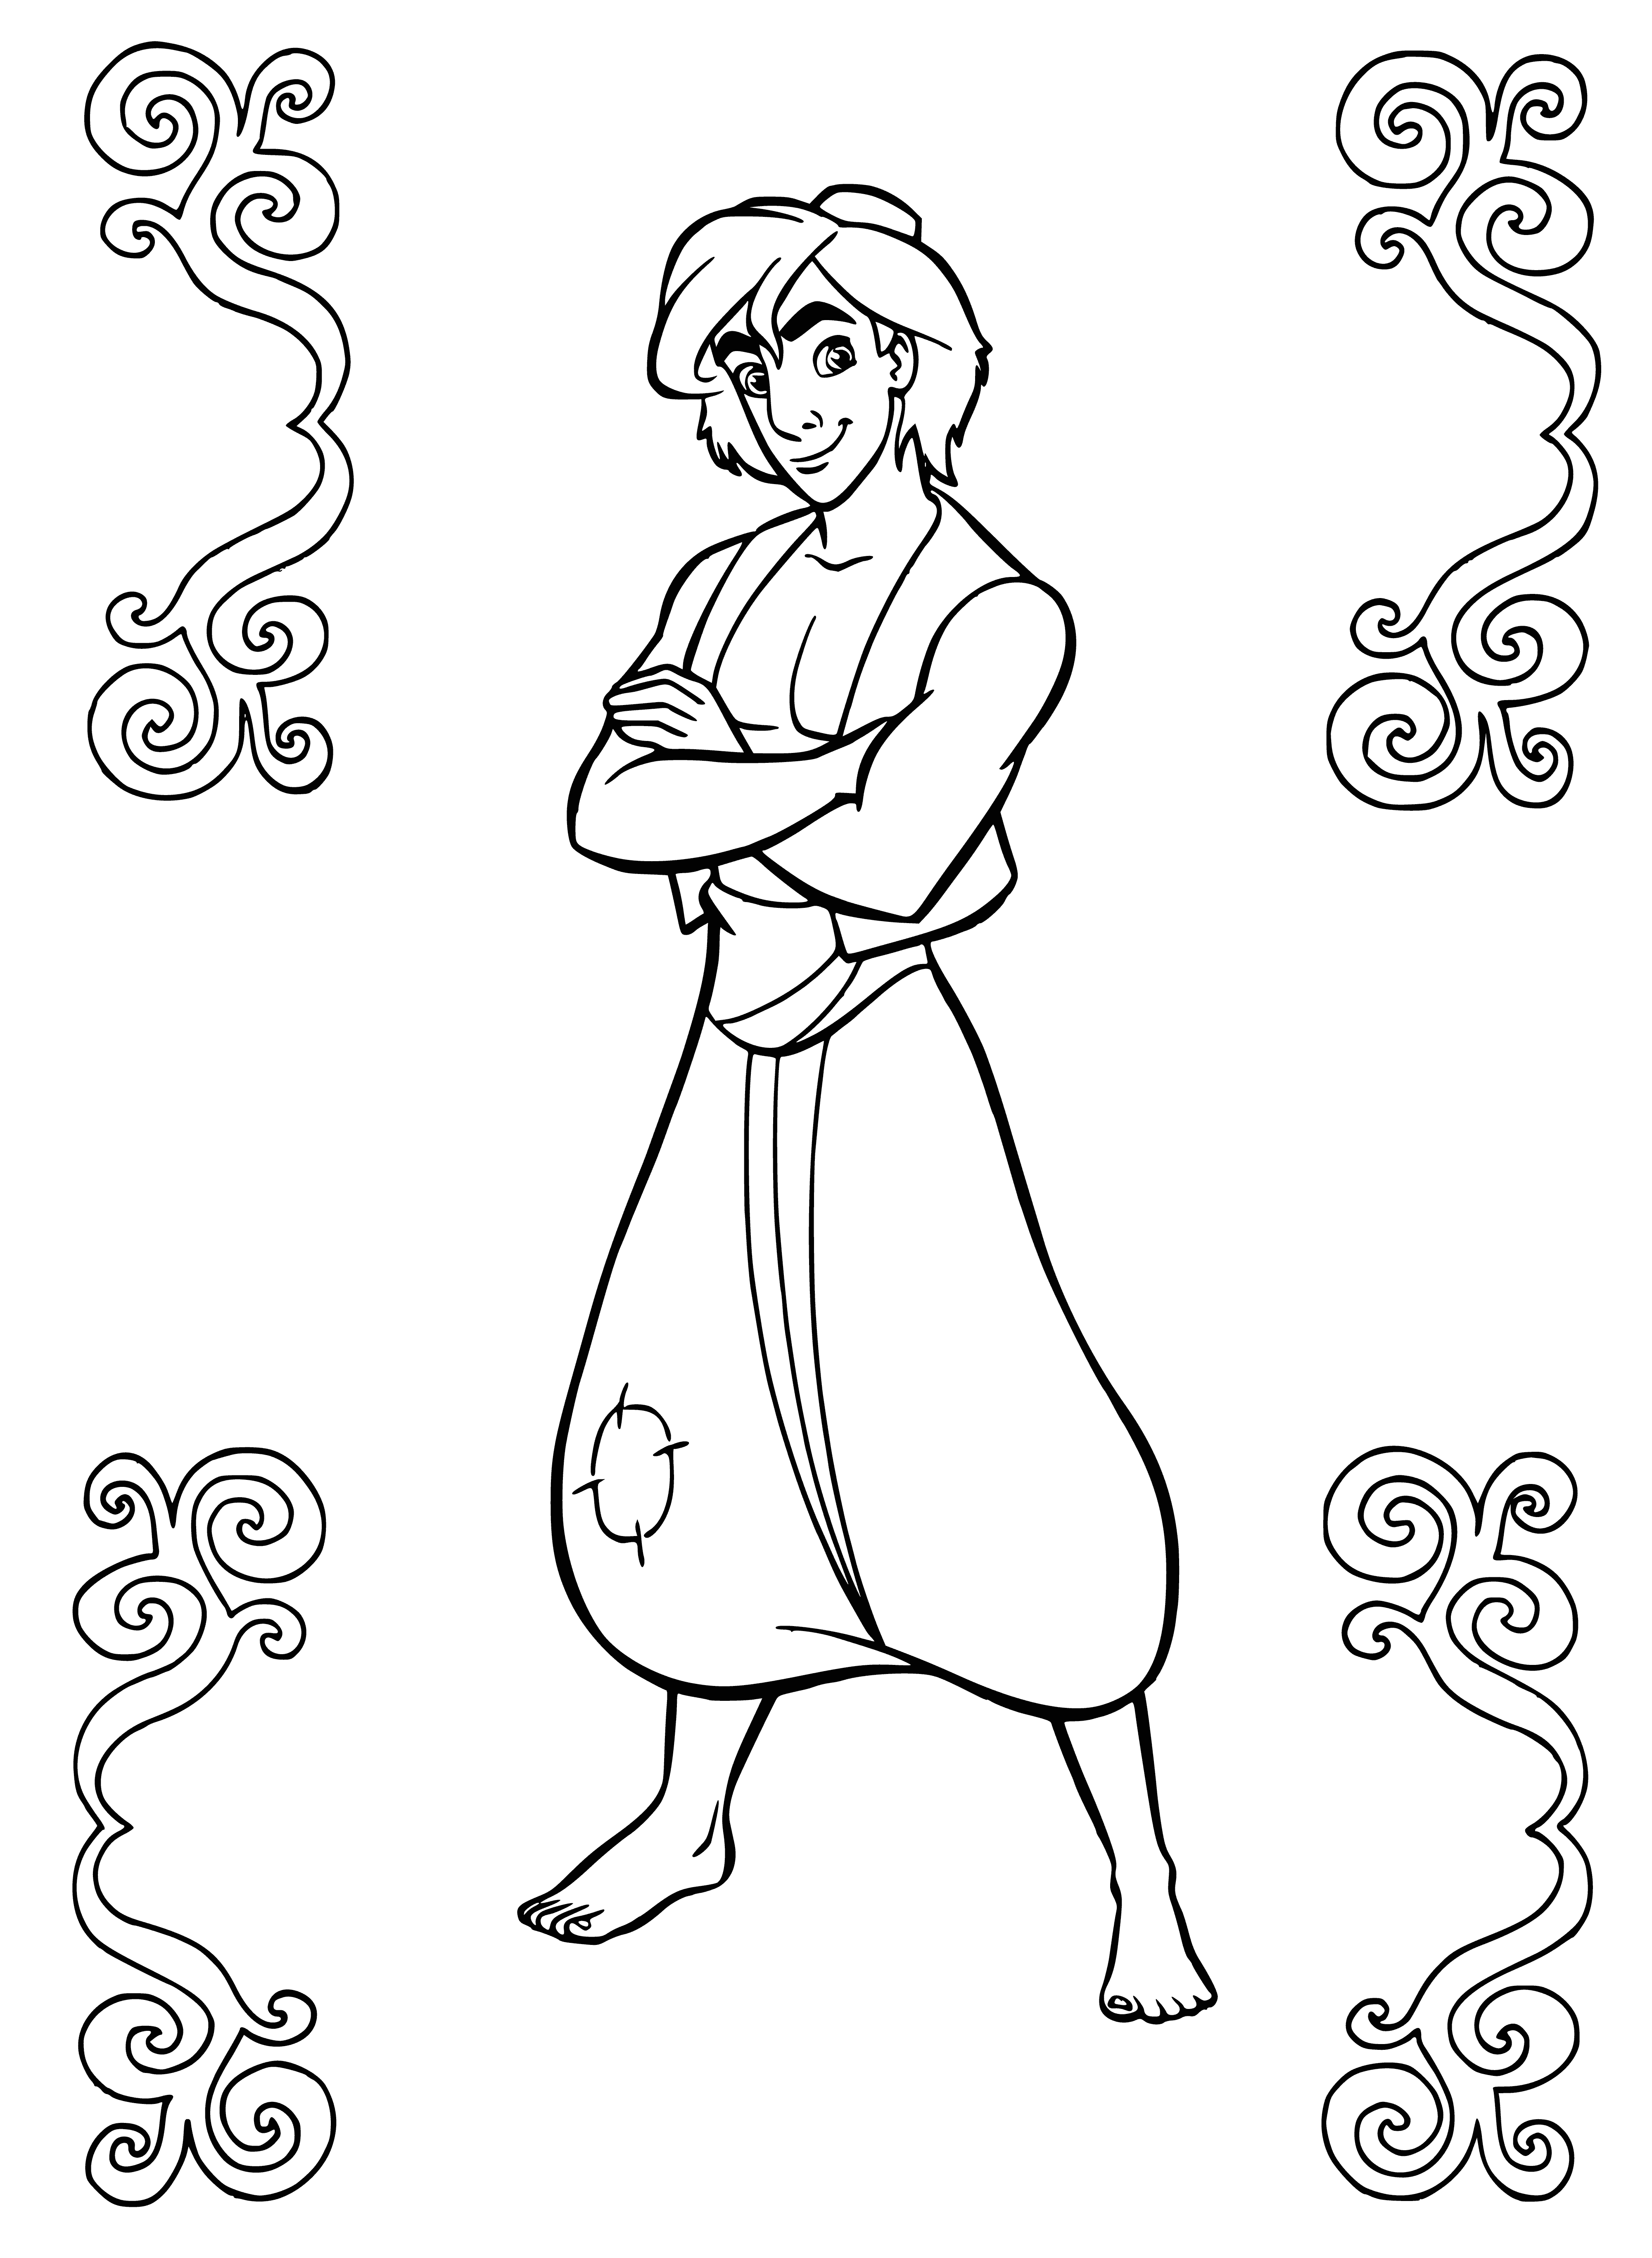 coloring page: Arab man stands in front of cave with treasure chest and dagger in belt; wears traditional Arabic clothing, including turban.